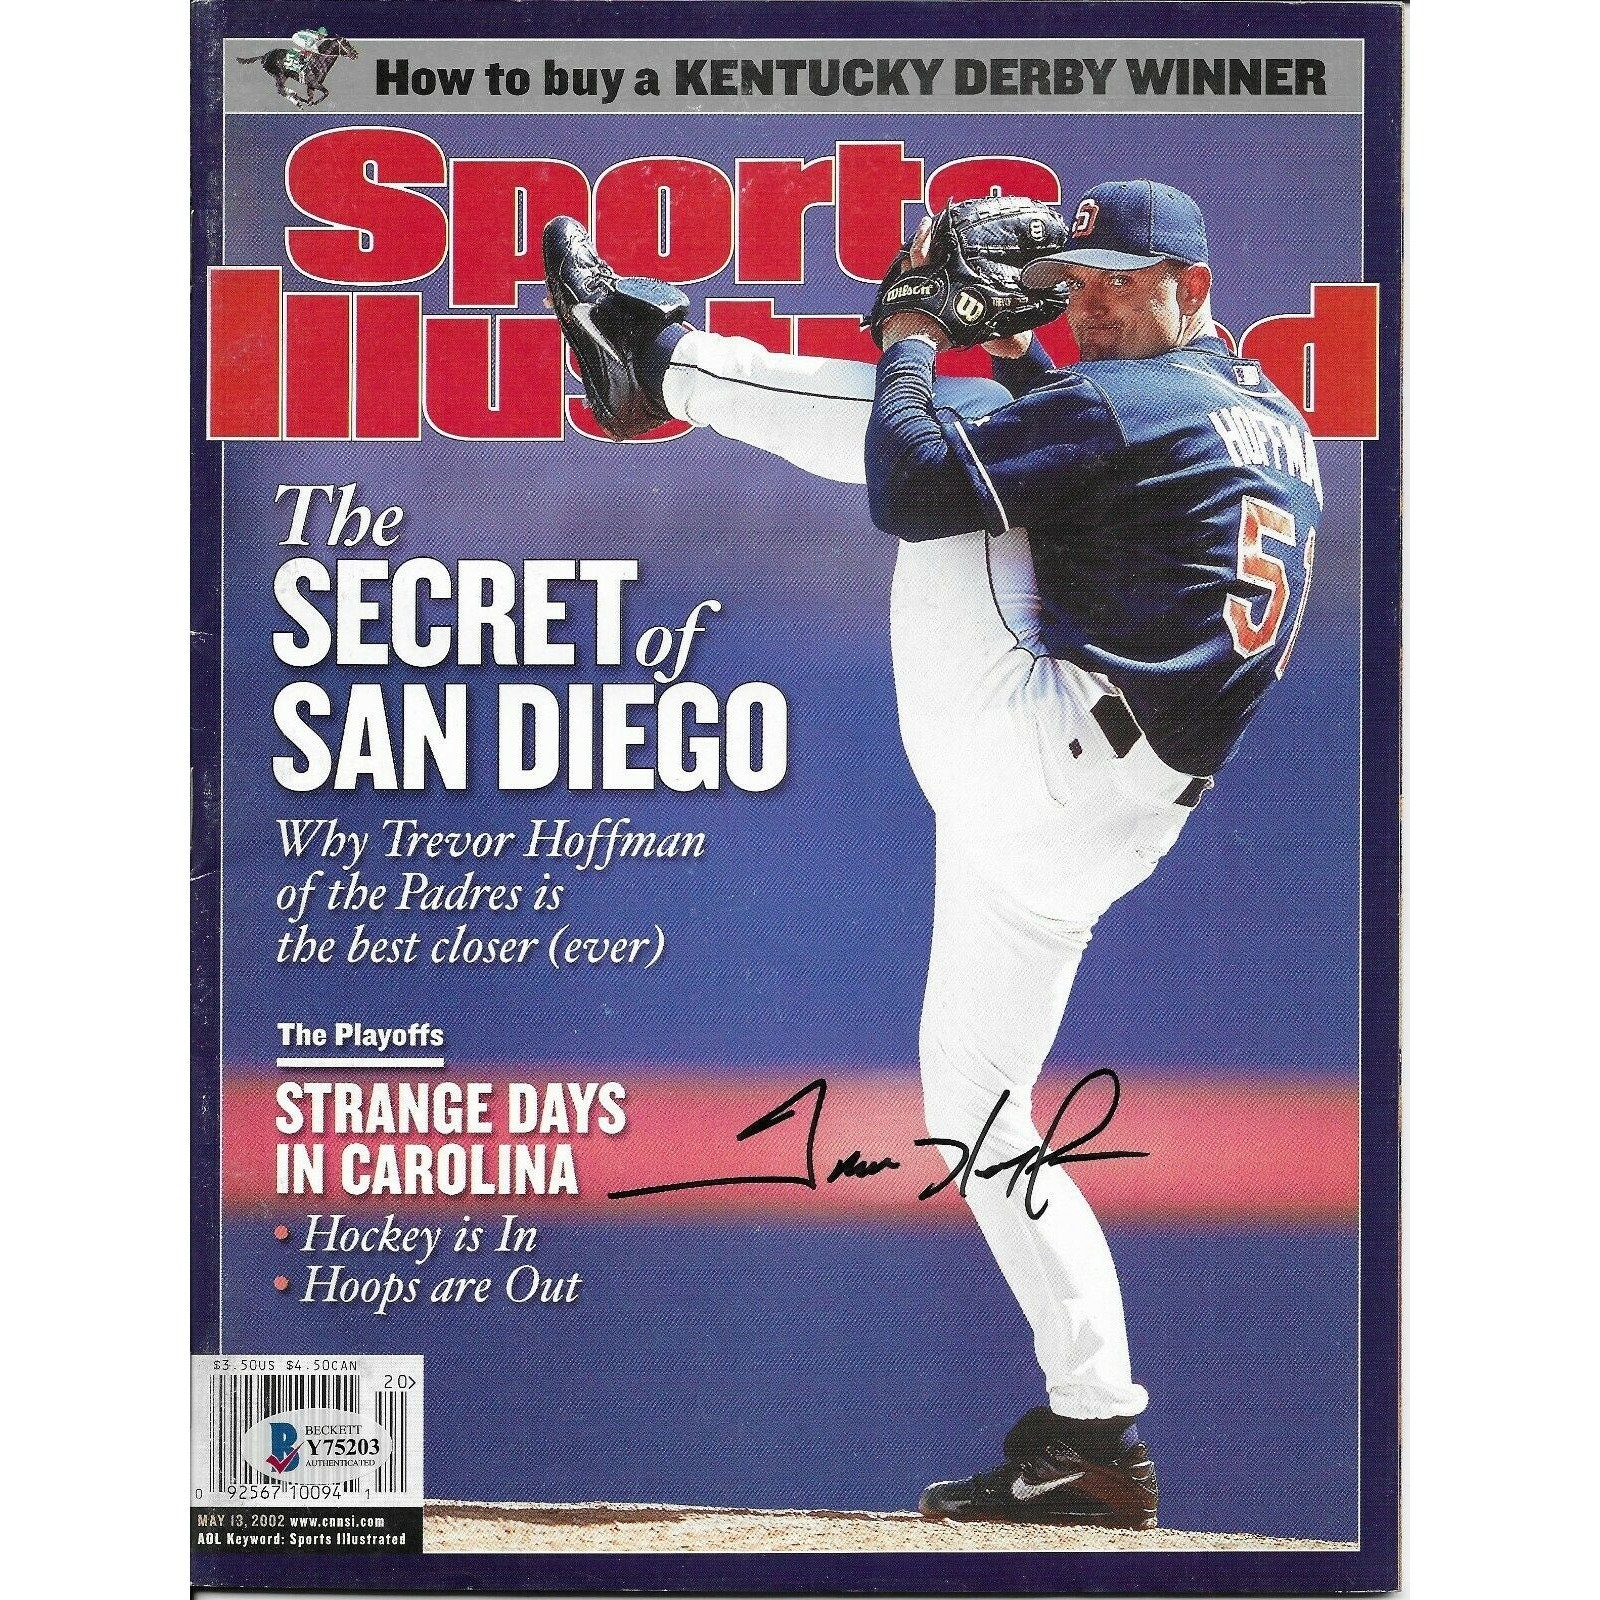 Scott Smith is all in on Sports Illustrated, with autographs from